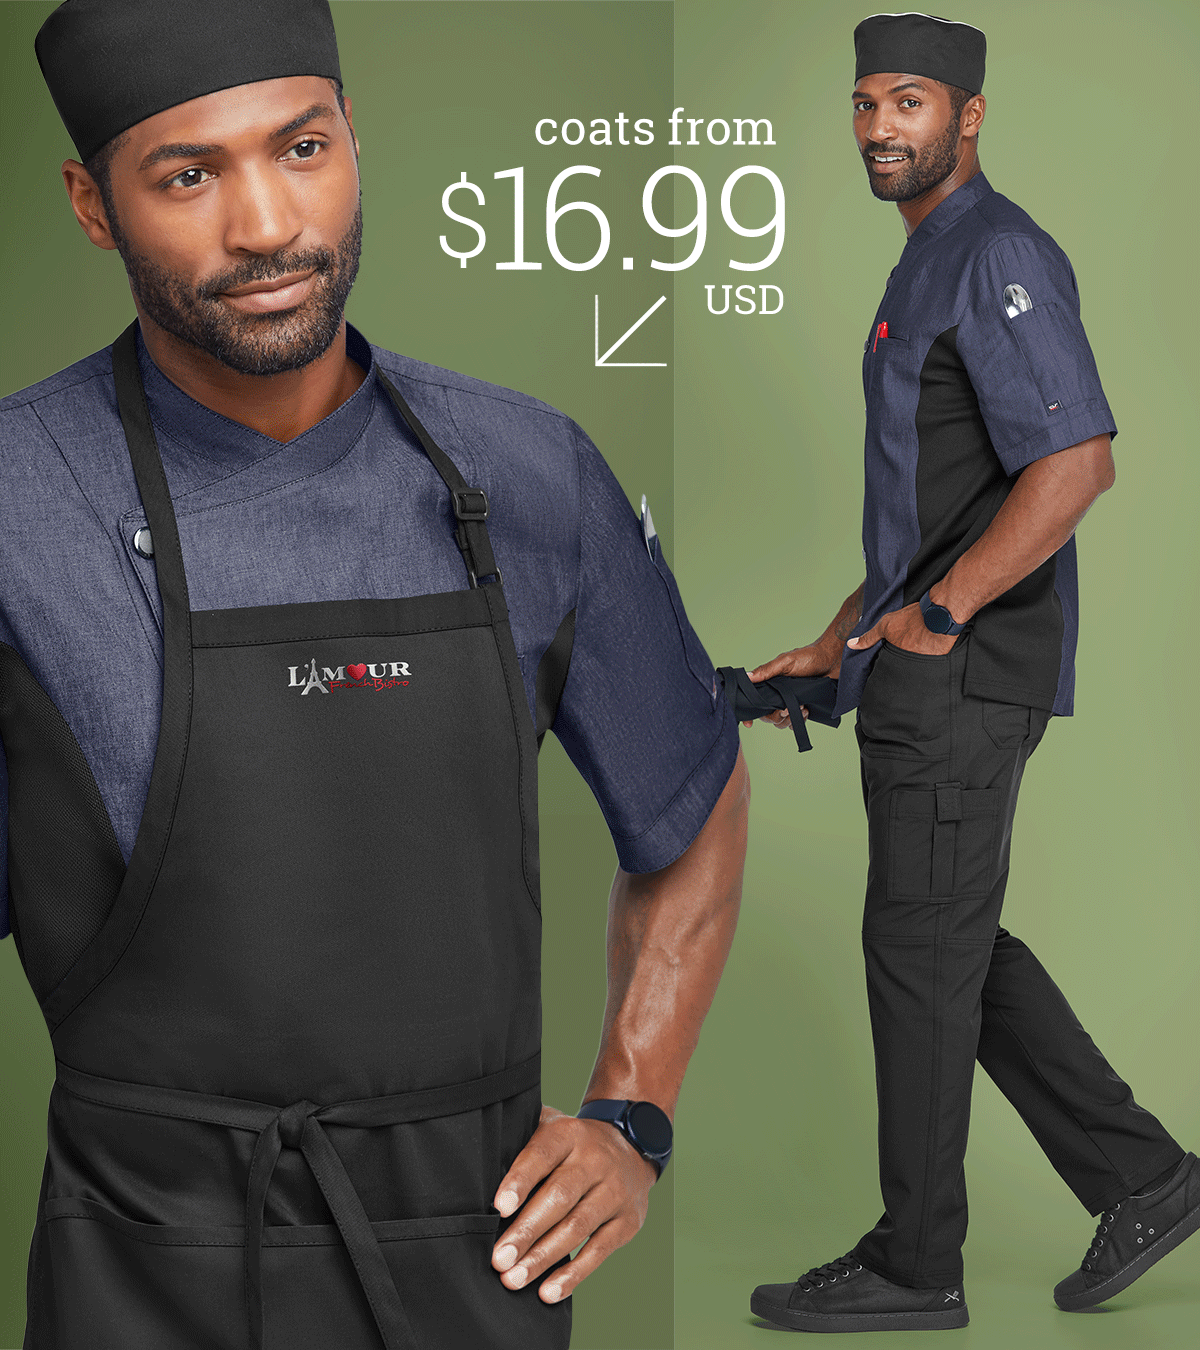 Peel…Chop…FIRE🔥 Gear up for the NEW YEAR - Chef Uniforms